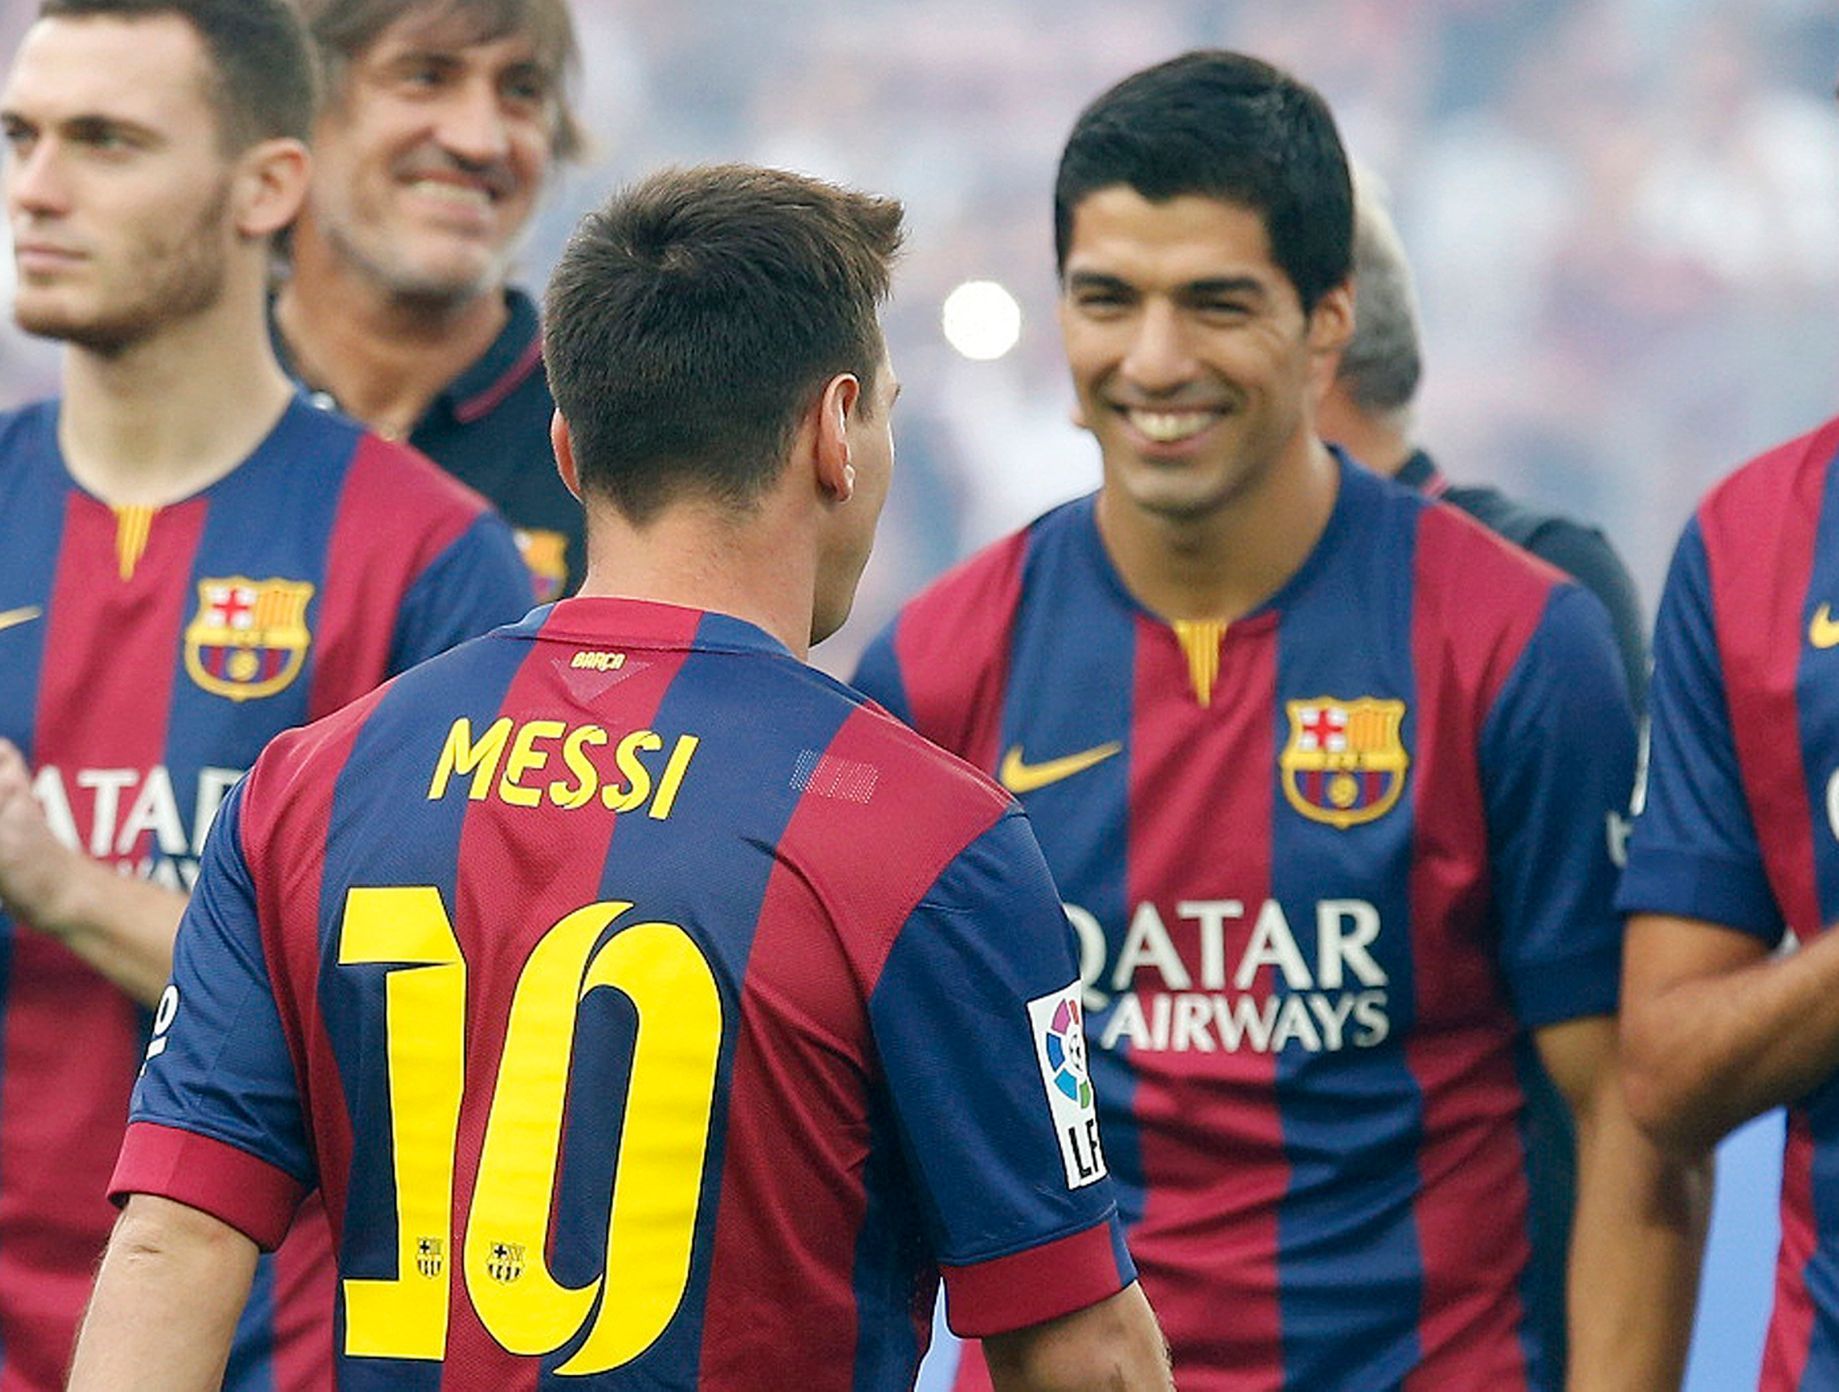 FC Barcelona's player Suarez smiles to teammate Messi during their team presentation at Nou Camp stadium in Barcelona